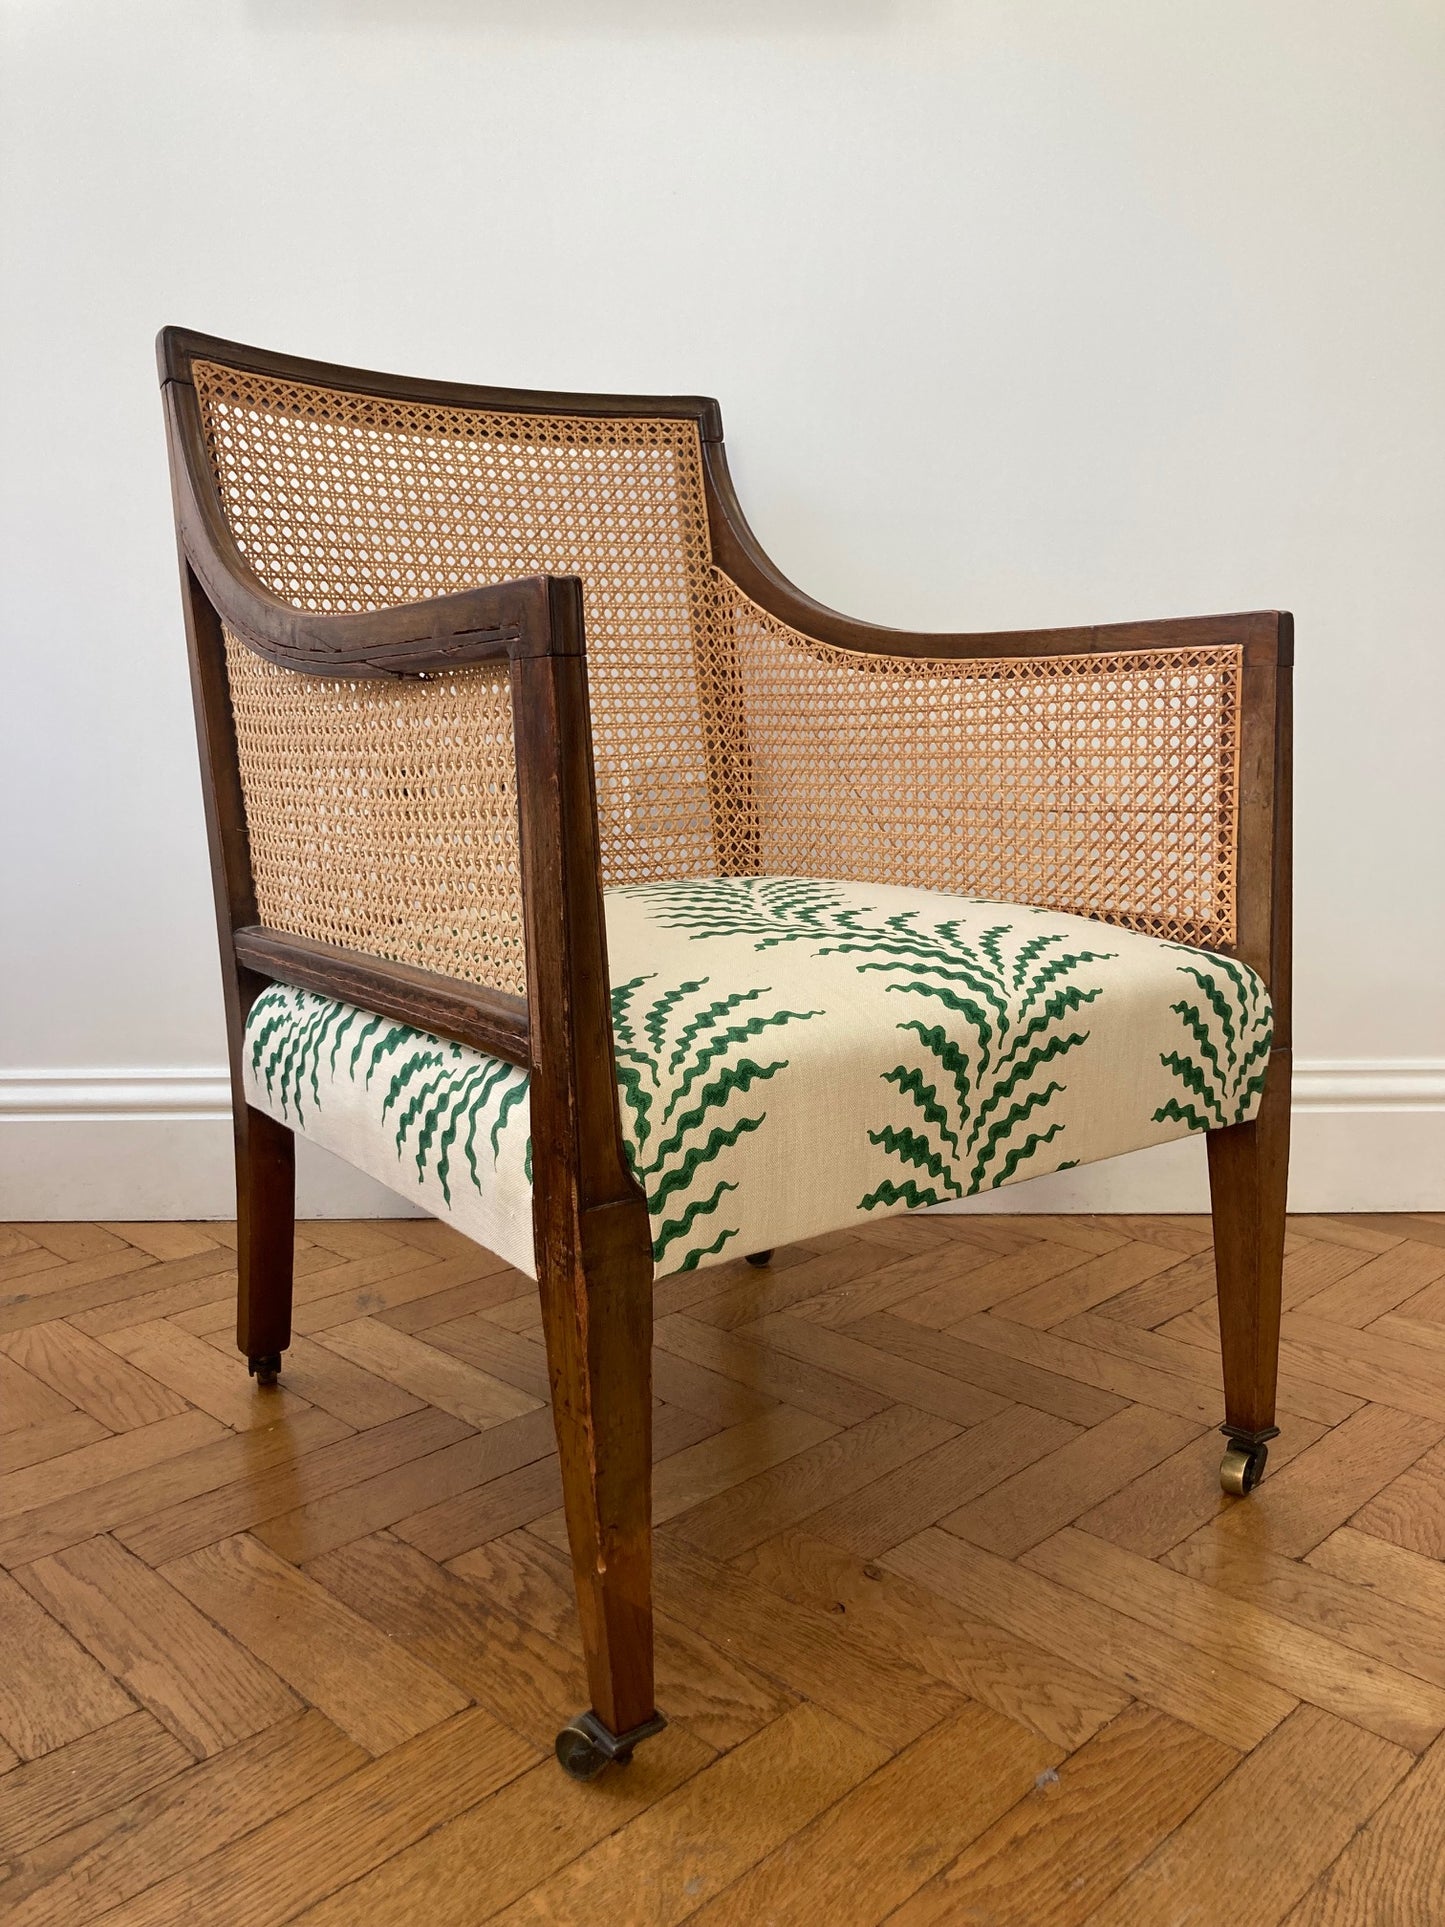 Early 19th Century Bergére cane library chair